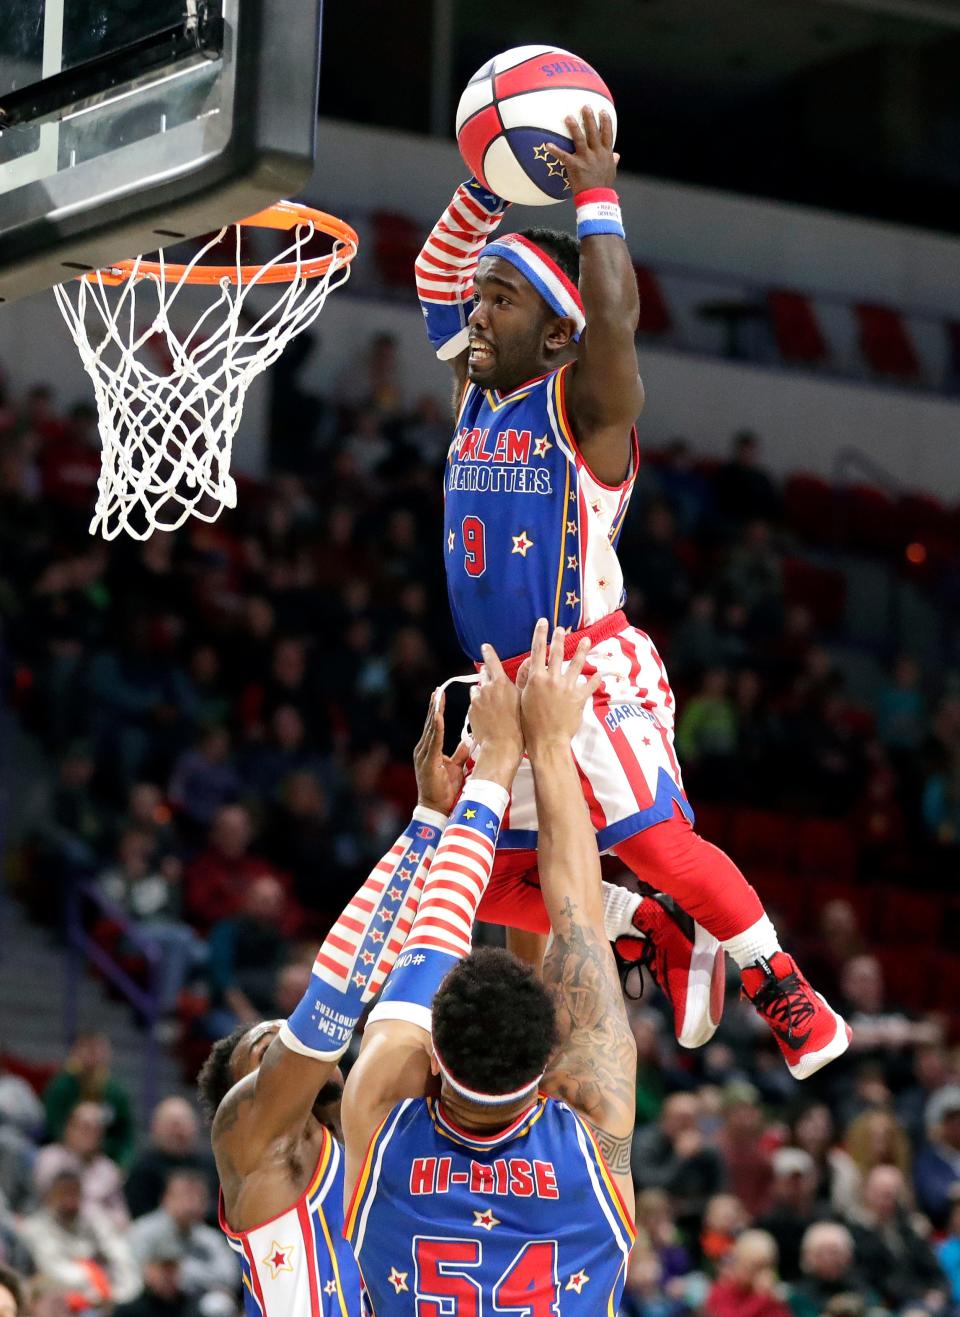 Hot Shot Swanson of the Harlem Globetrotters dunks the ball during a game against the Washington Generals on Dec. 28, 2019, at the Resch Center in Ashwaubenon.